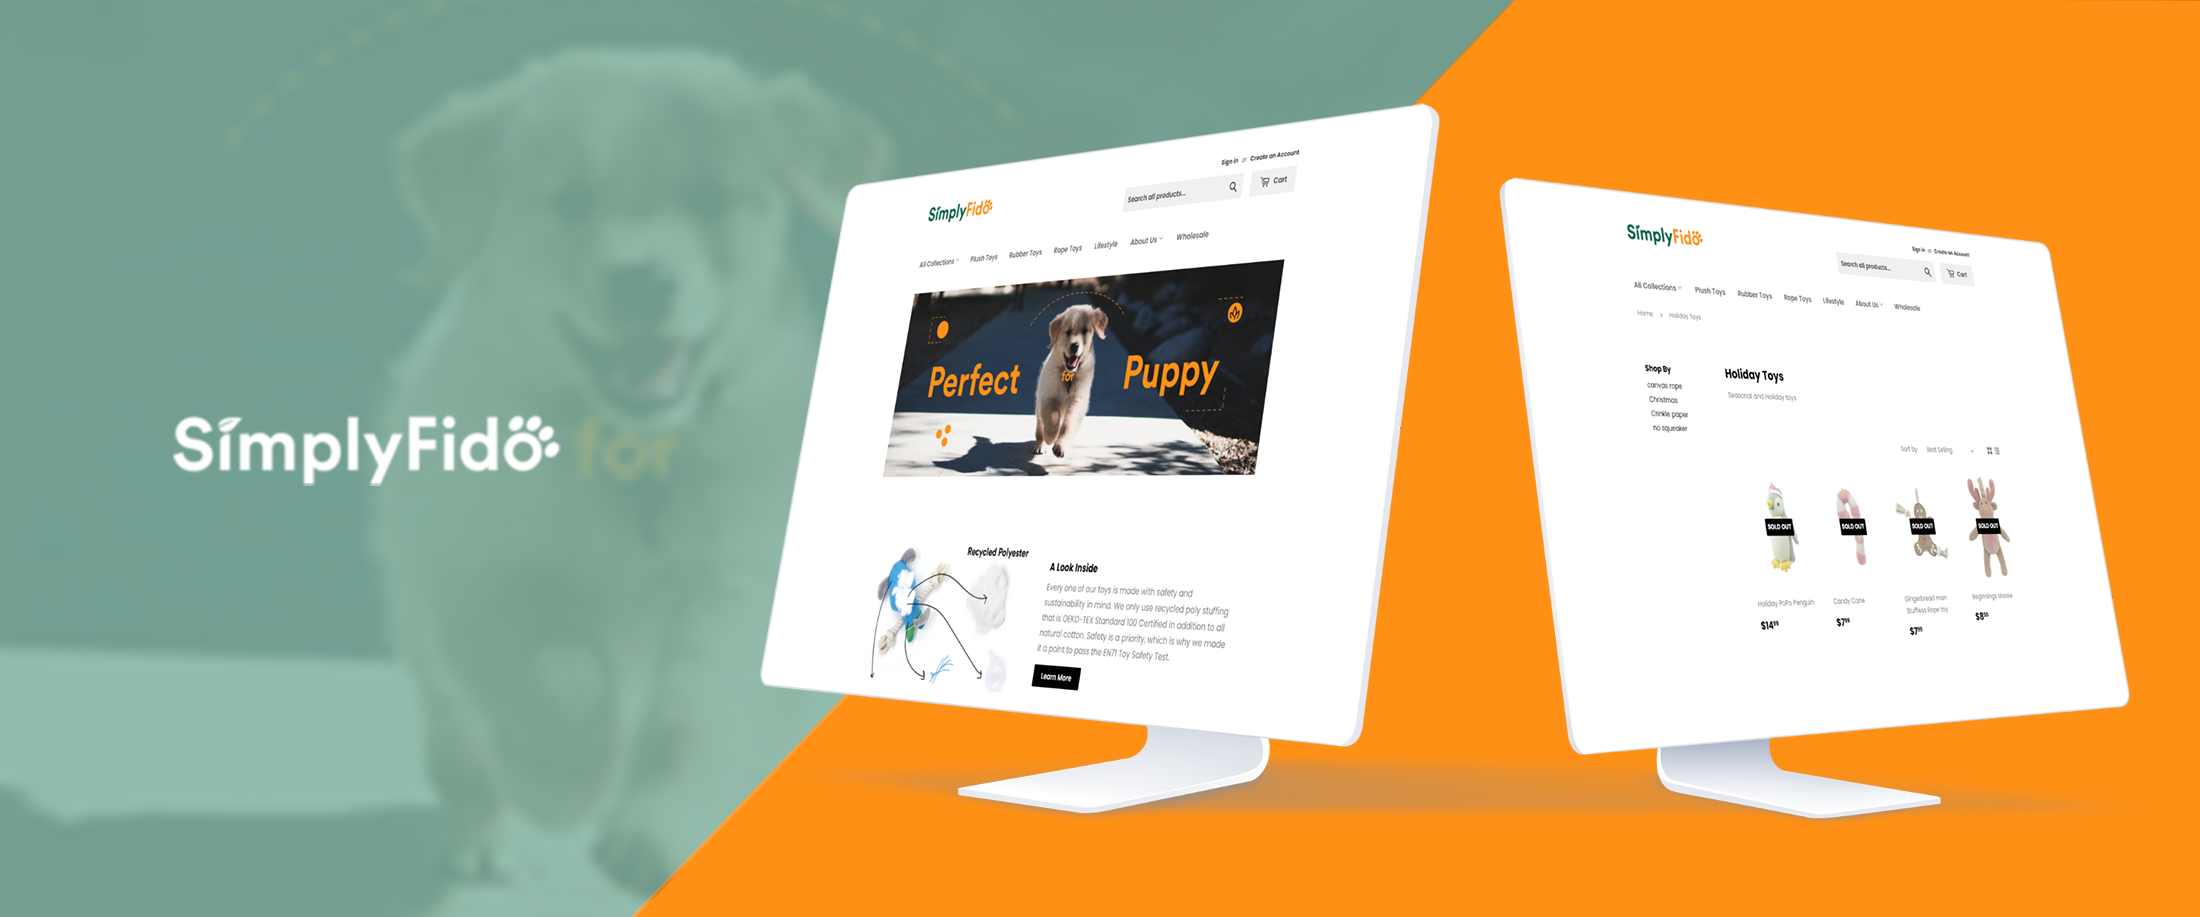 Simply-Fido-Banner